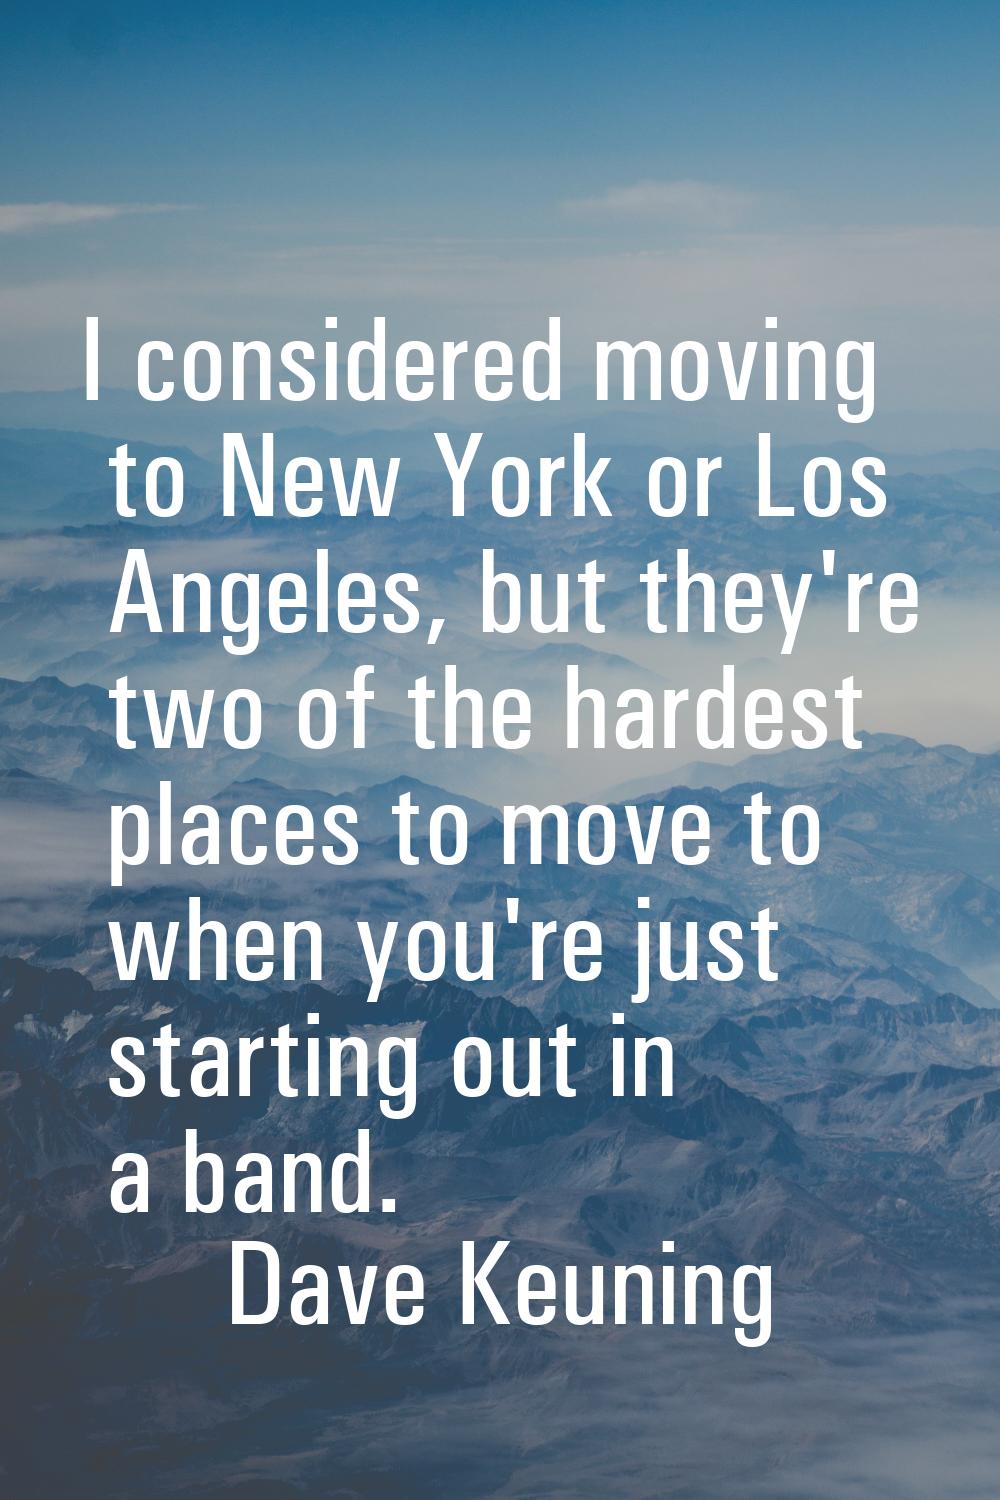 I considered moving to New York or Los Angeles, but they're two of the hardest places to move to wh